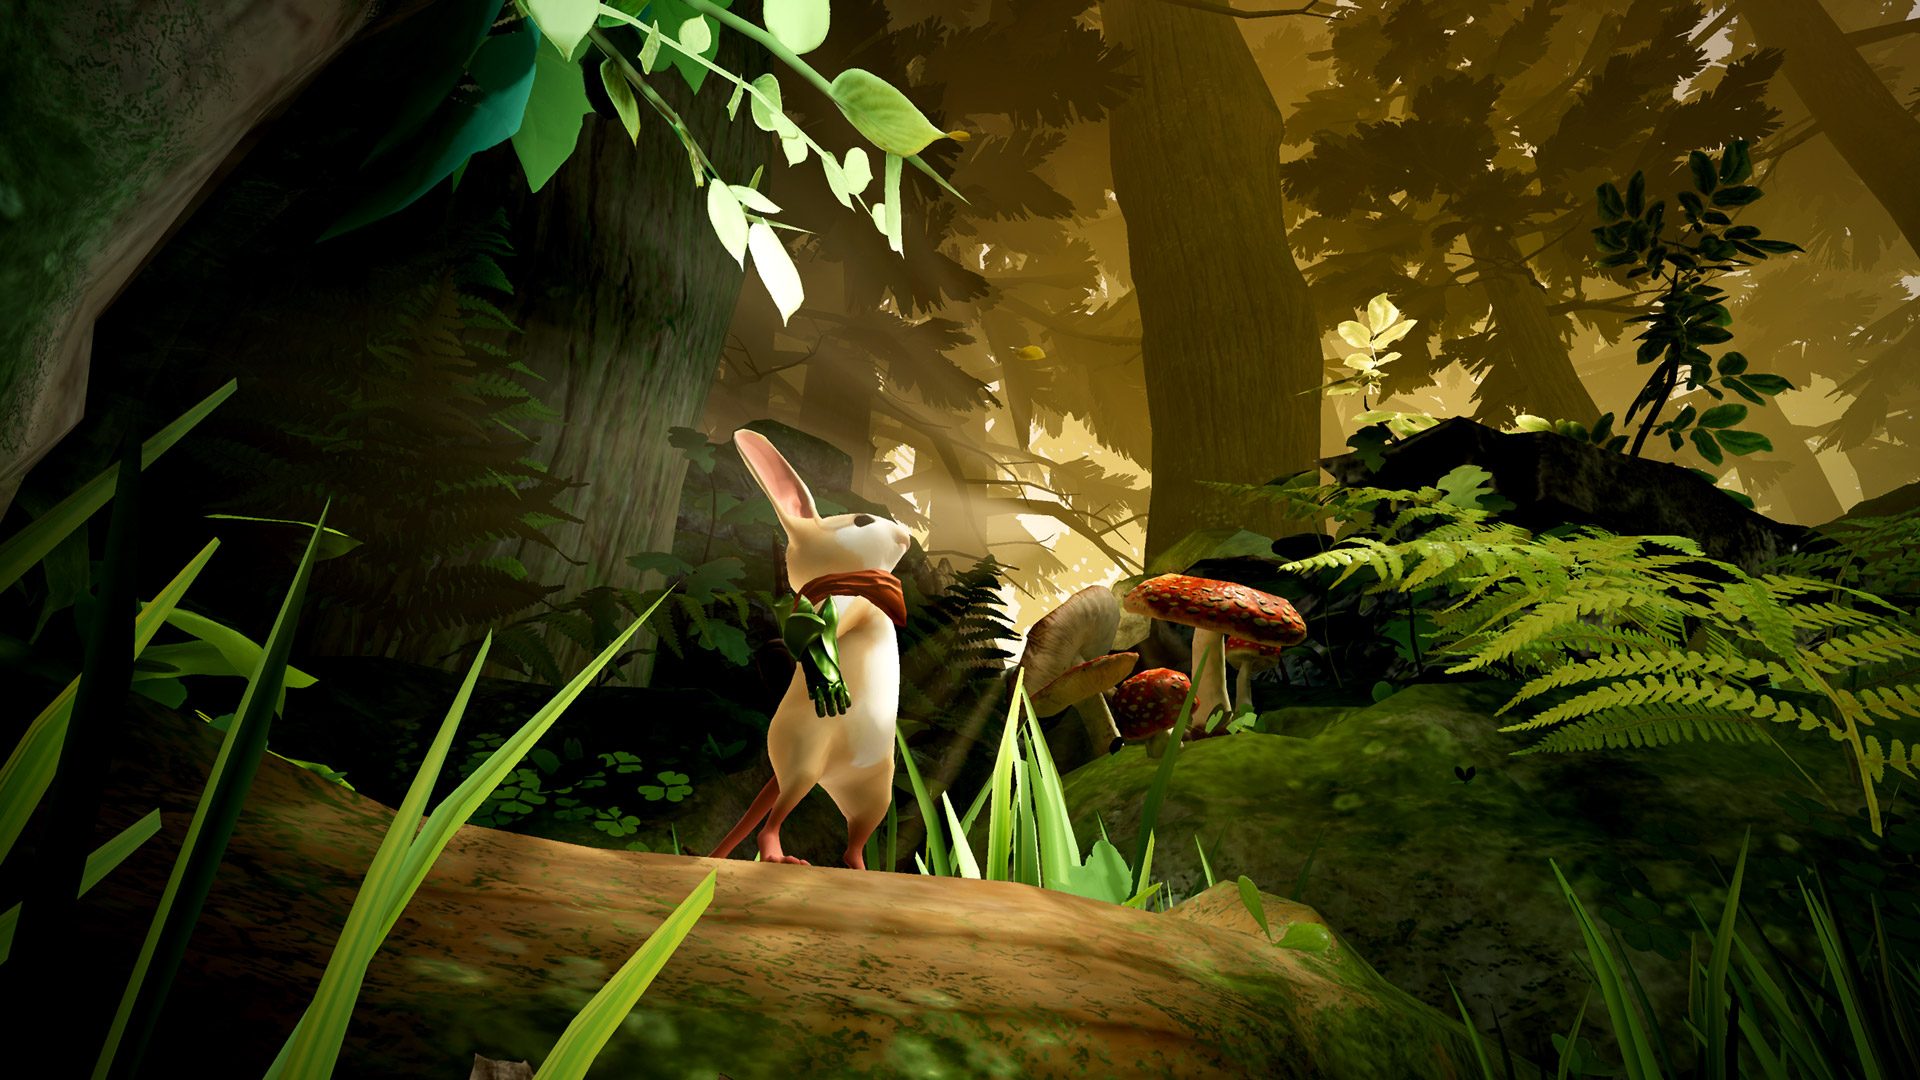 Sony Reveals 14 Minutes Of New Moss Psvr Gameplay Ahead Of February Launch Page 144 Of 504 Road To Vr